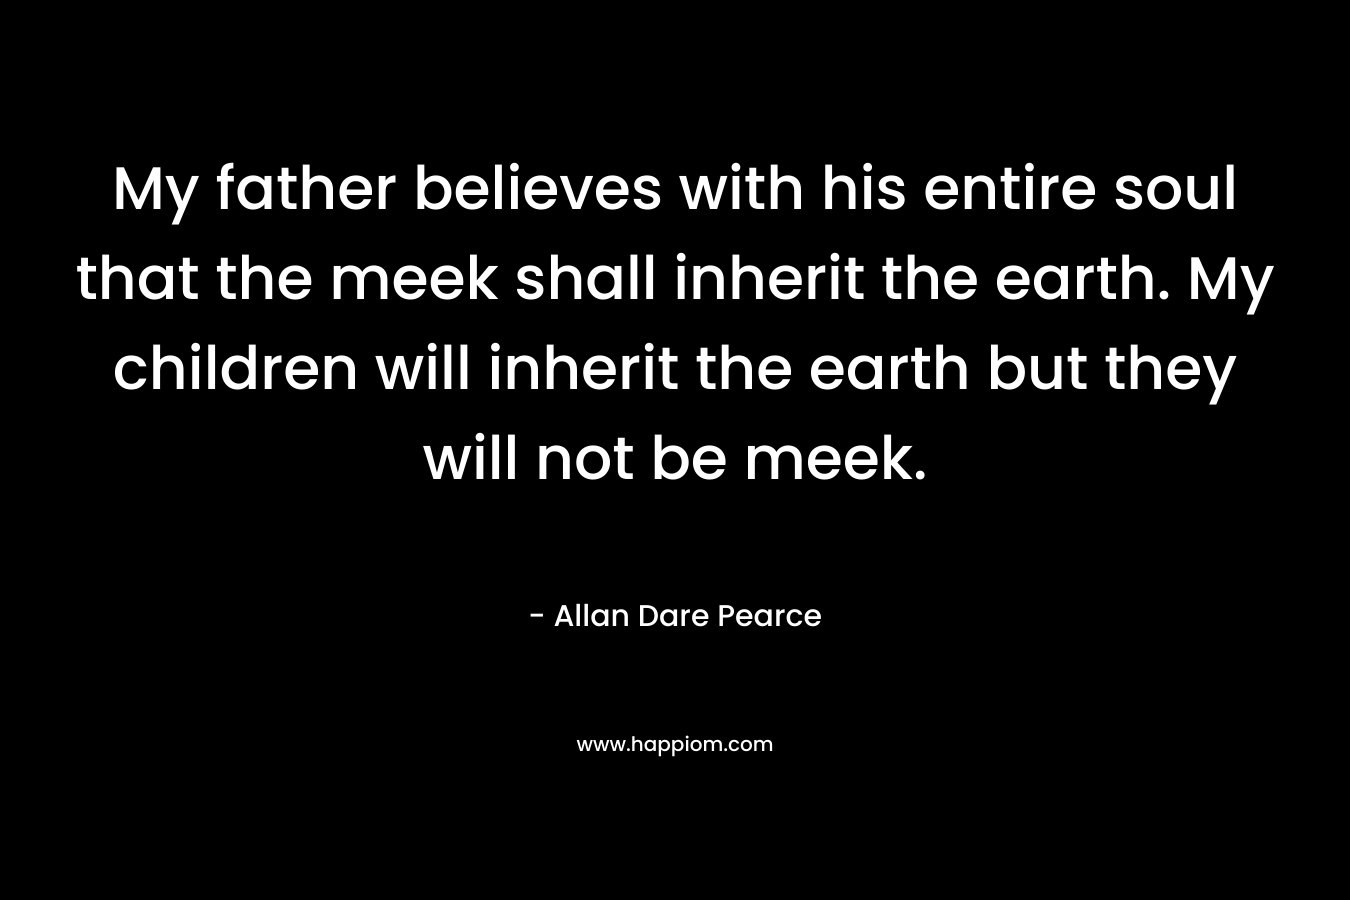 My father believes with his entire soul that the meek shall inherit the earth. My children will inherit the earth but they will not be meek.